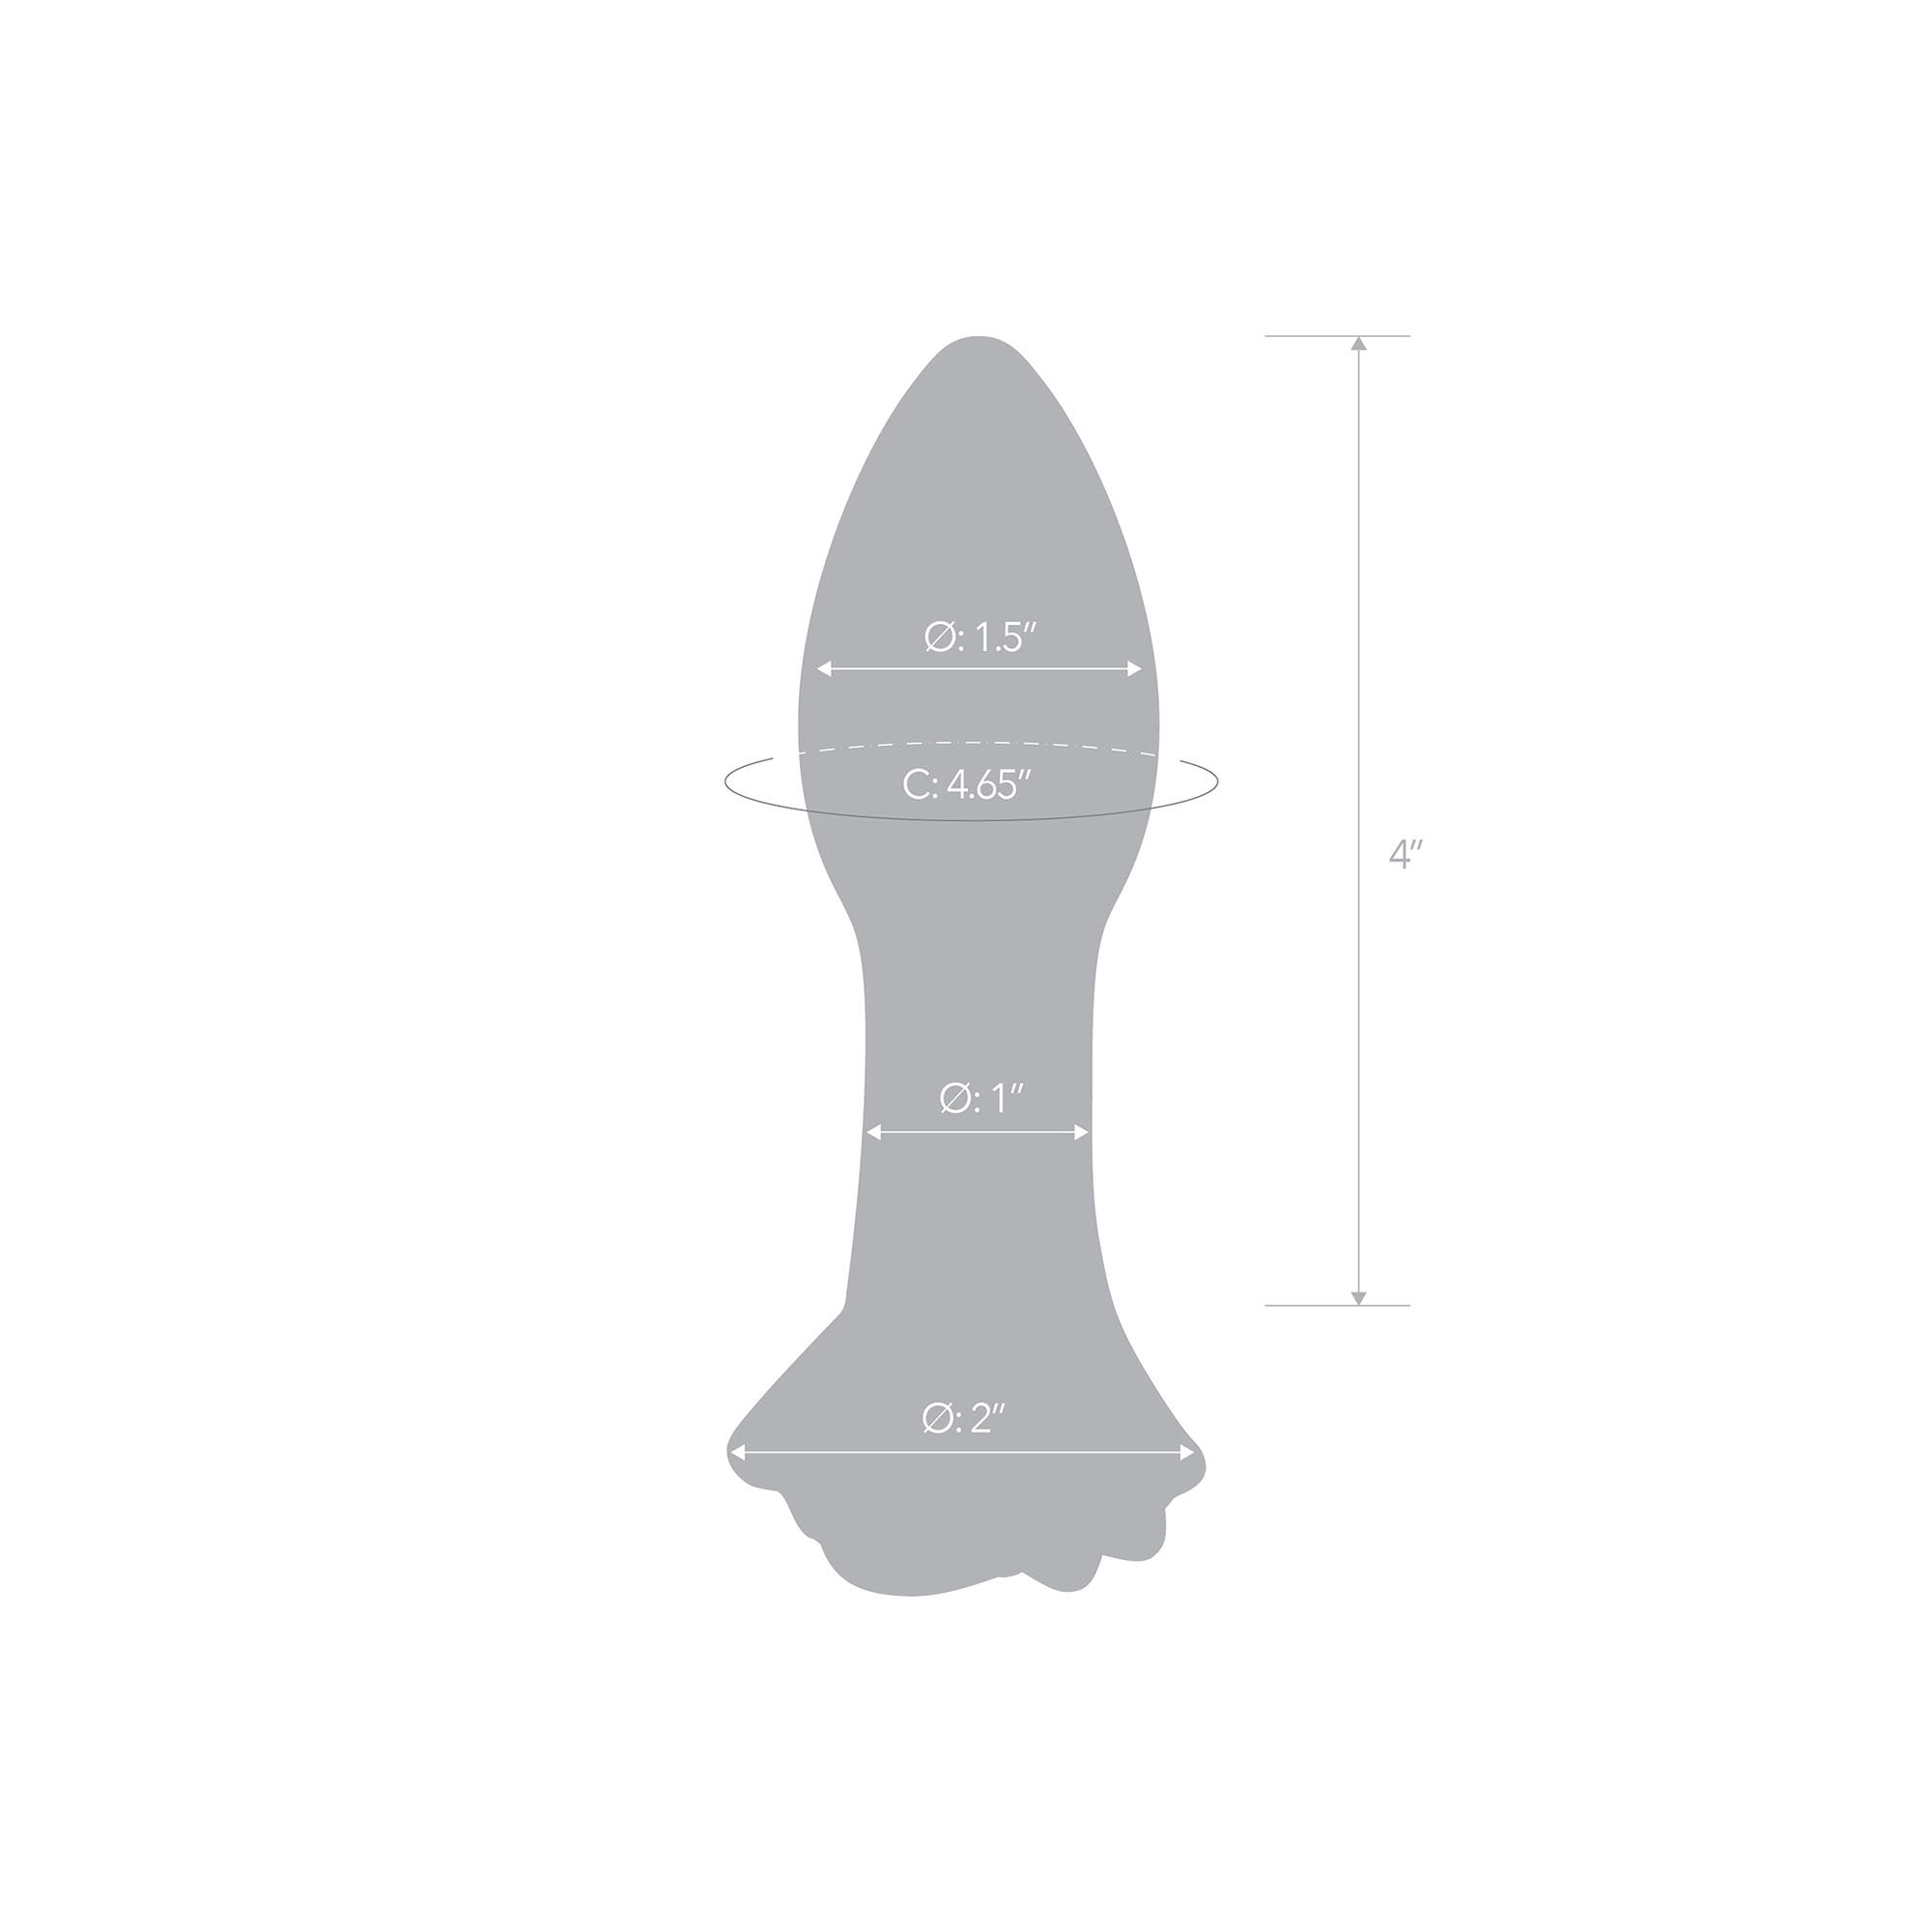 Specifications of the 5 inch Rosebud Glass Butt Plug